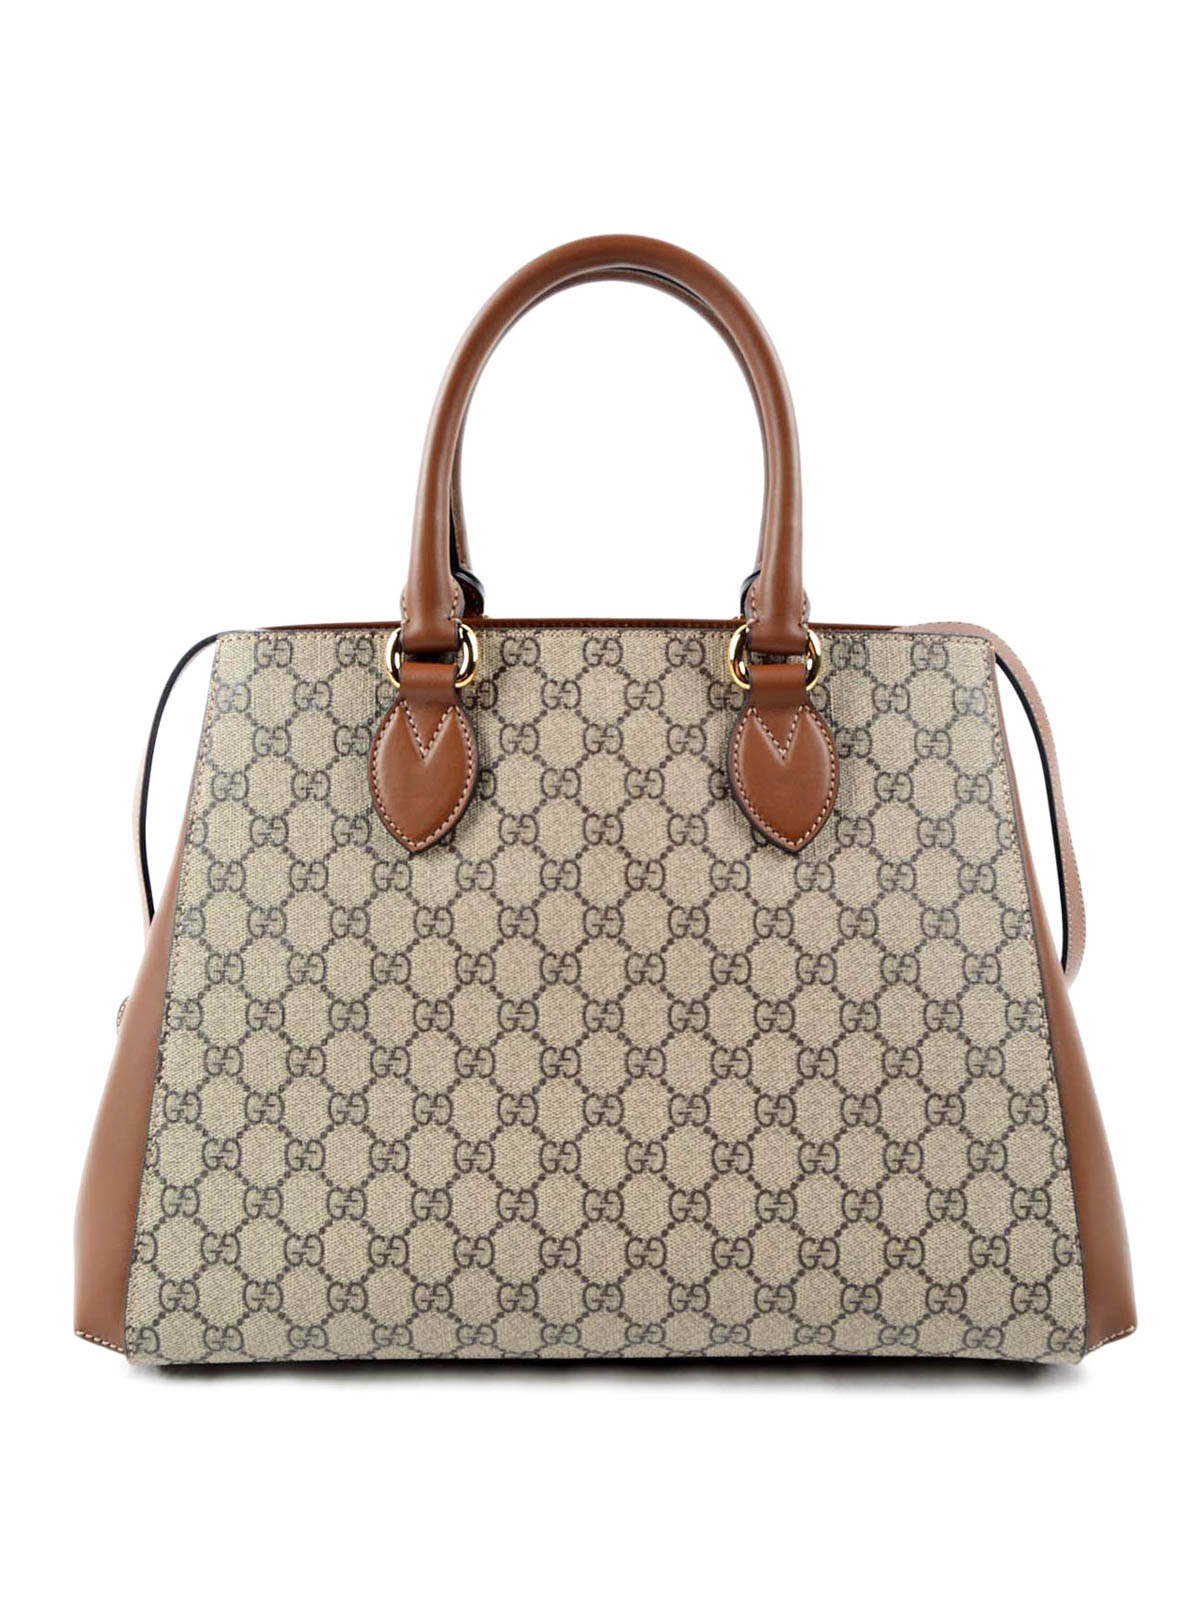 Gucci - GG Supreme and leather tote bag - totes bags - 453704KHNKG8534